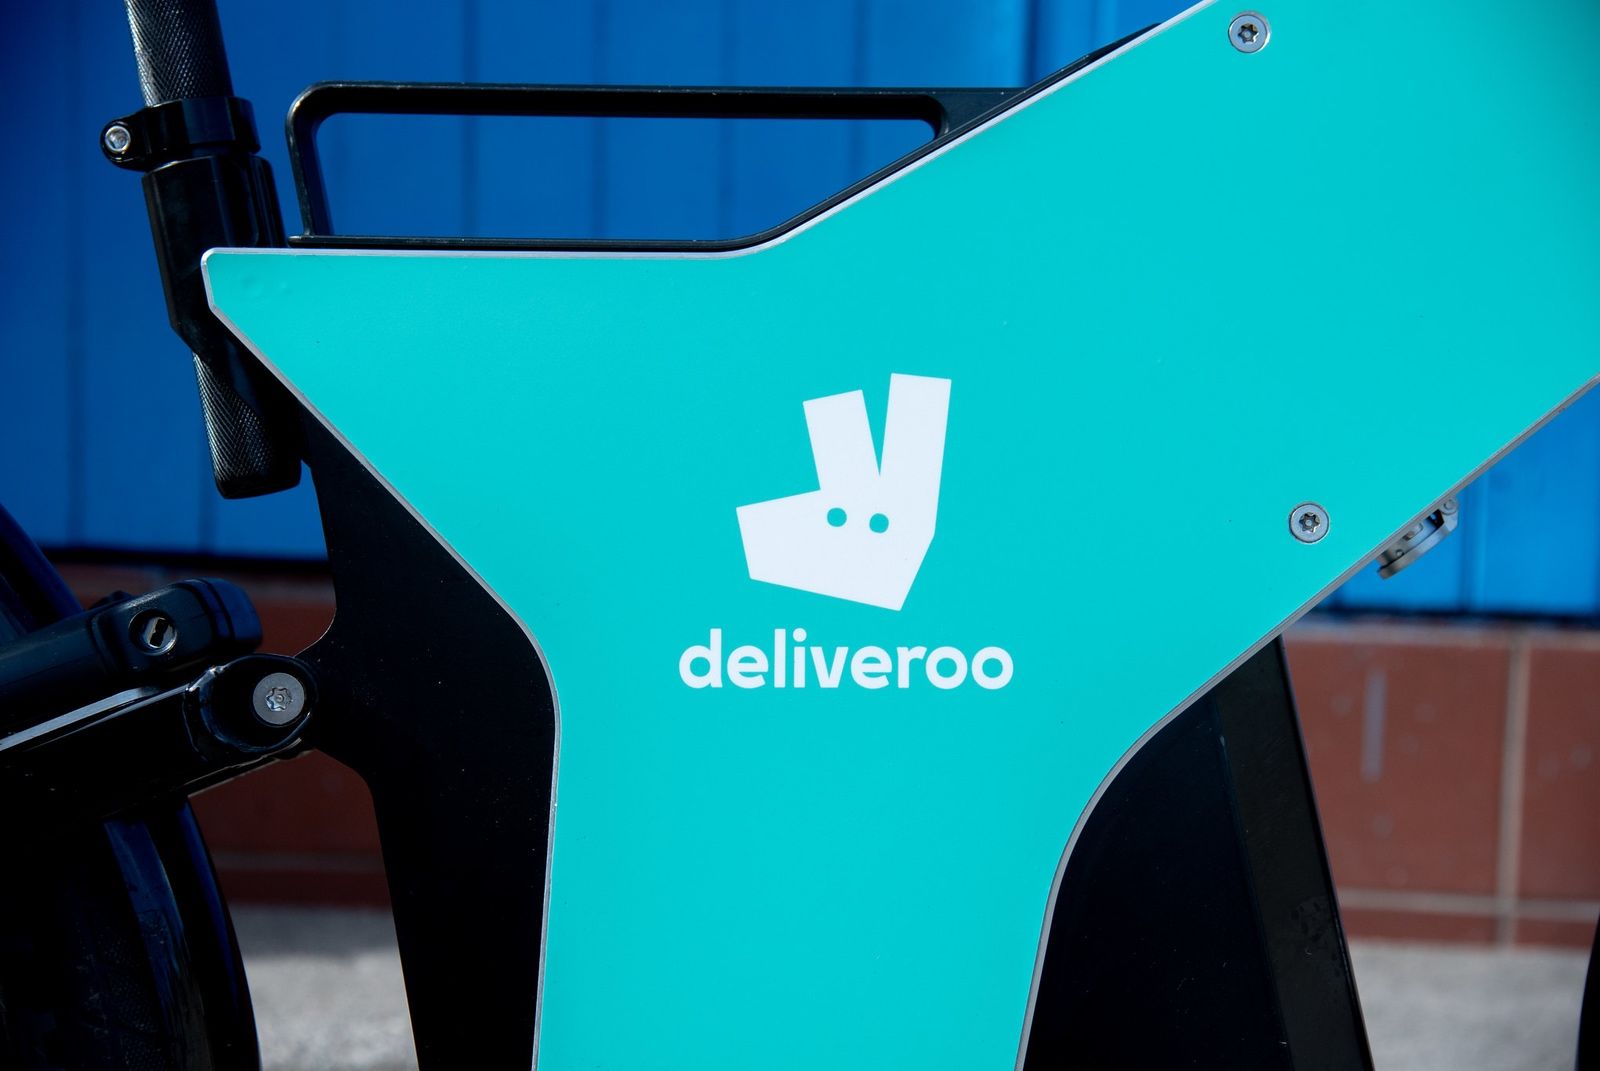 How to get free Deliveroo delivery thanks to Amazon Prime photo 1